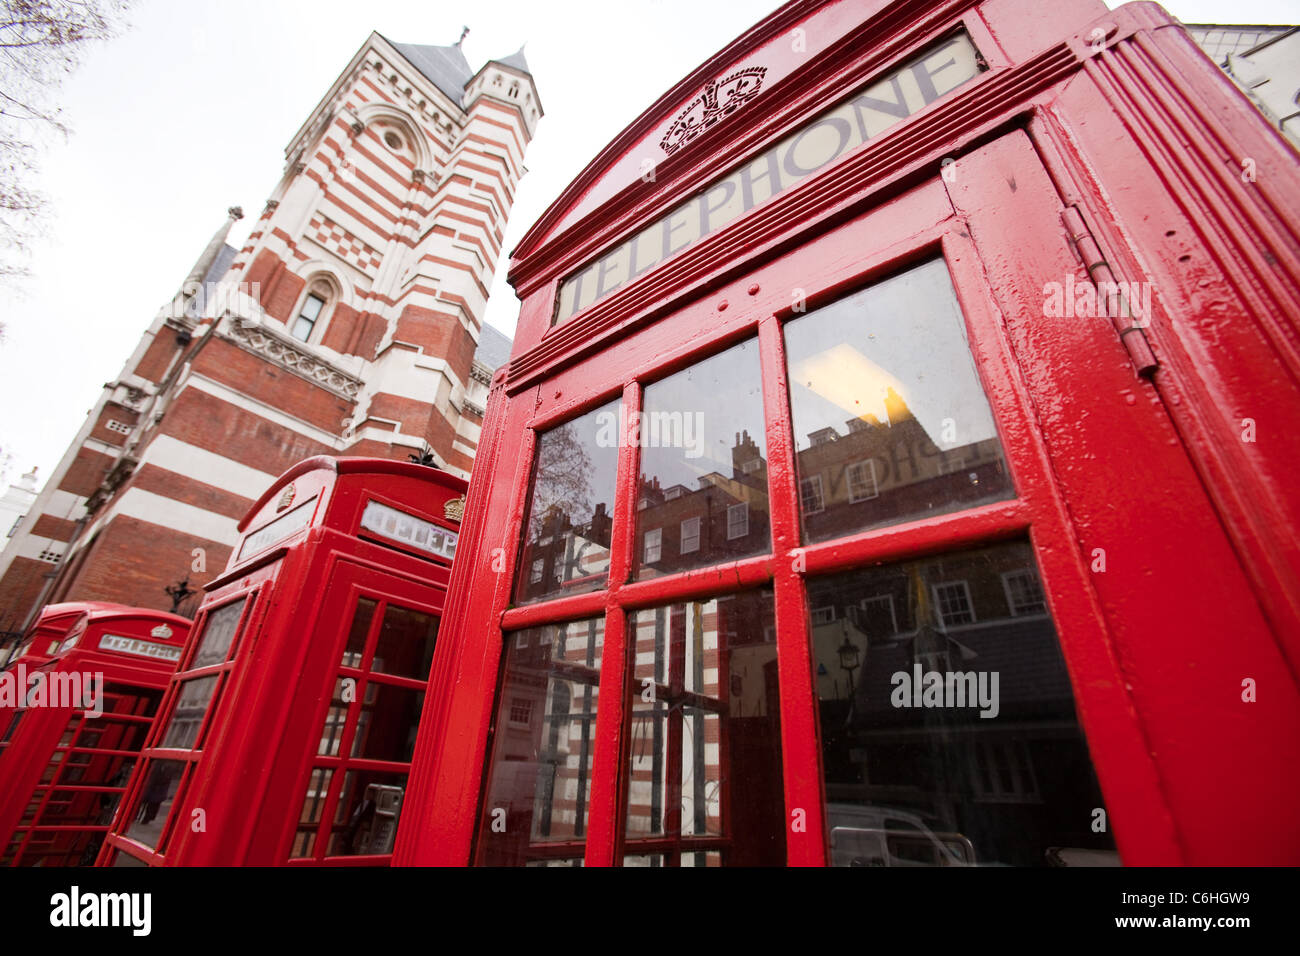 Red phone boxes near the High Court, Chancery Lane, London Stock Photo